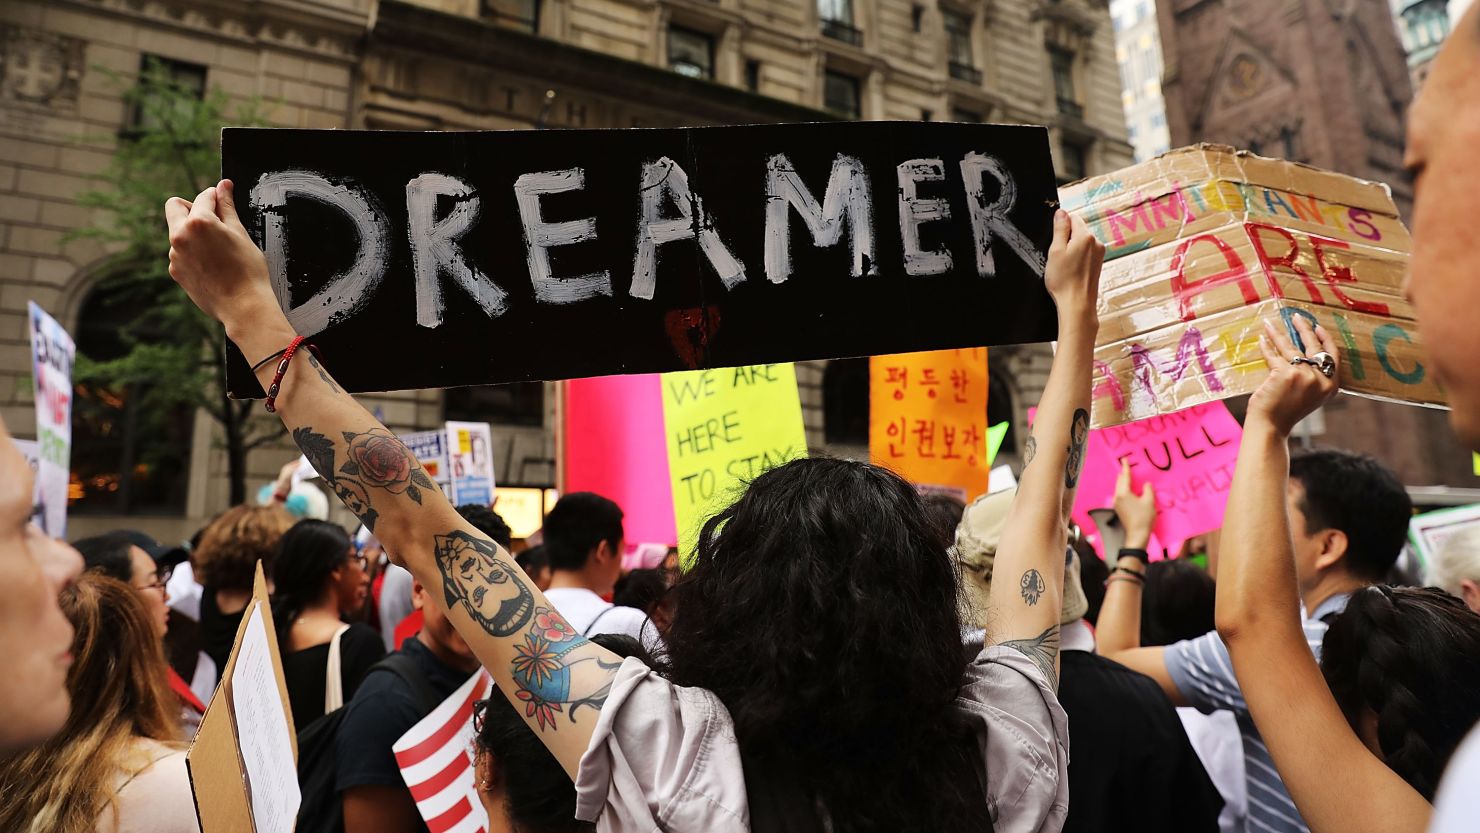 Immigration advocates and supporters rallied outside Trump Tower in New York City on the five-year anniversary of the Deferred Action for Childhood Arrivals (DACA) program in 2017.